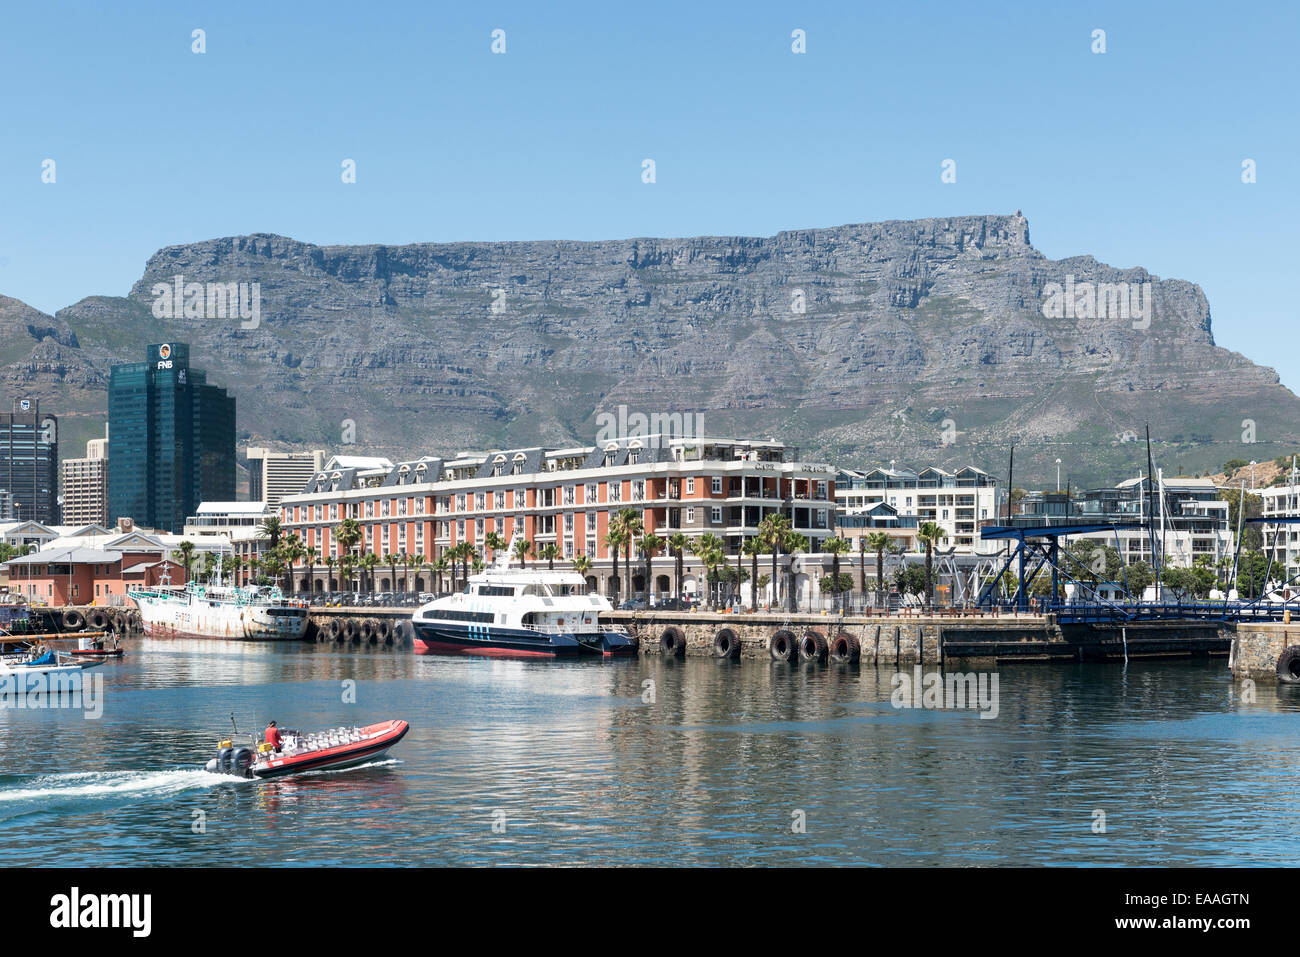 The Cape Grace Hotel, old harbor and Table Mountain in the background Stock Photo